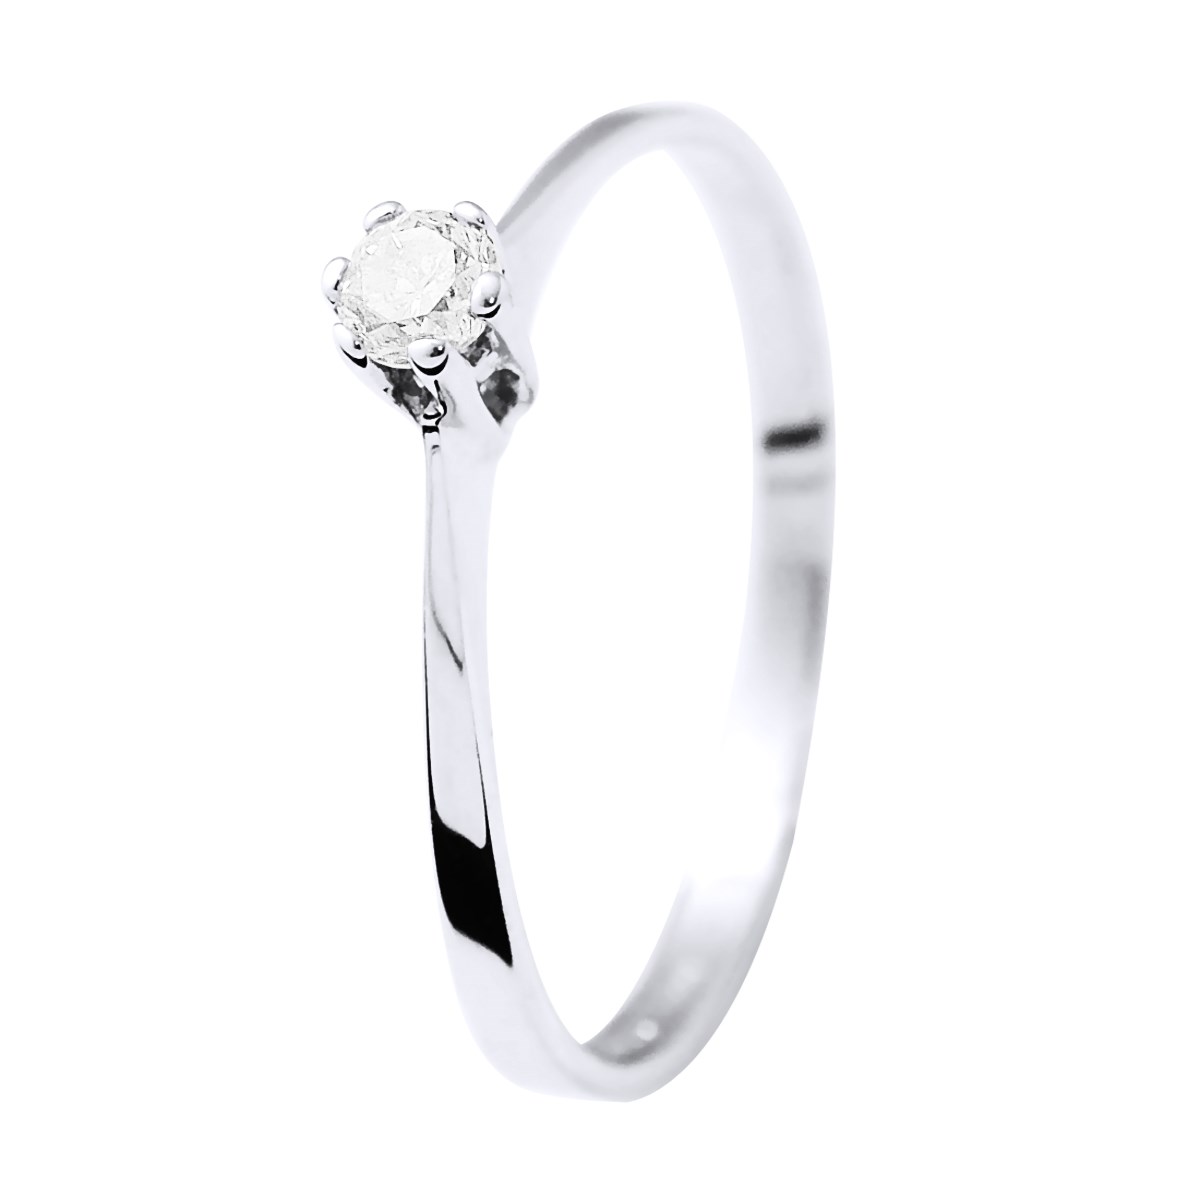 Solitaire Diamant 0,10 Cts 4 Griffes Or Blanc 18 Carats